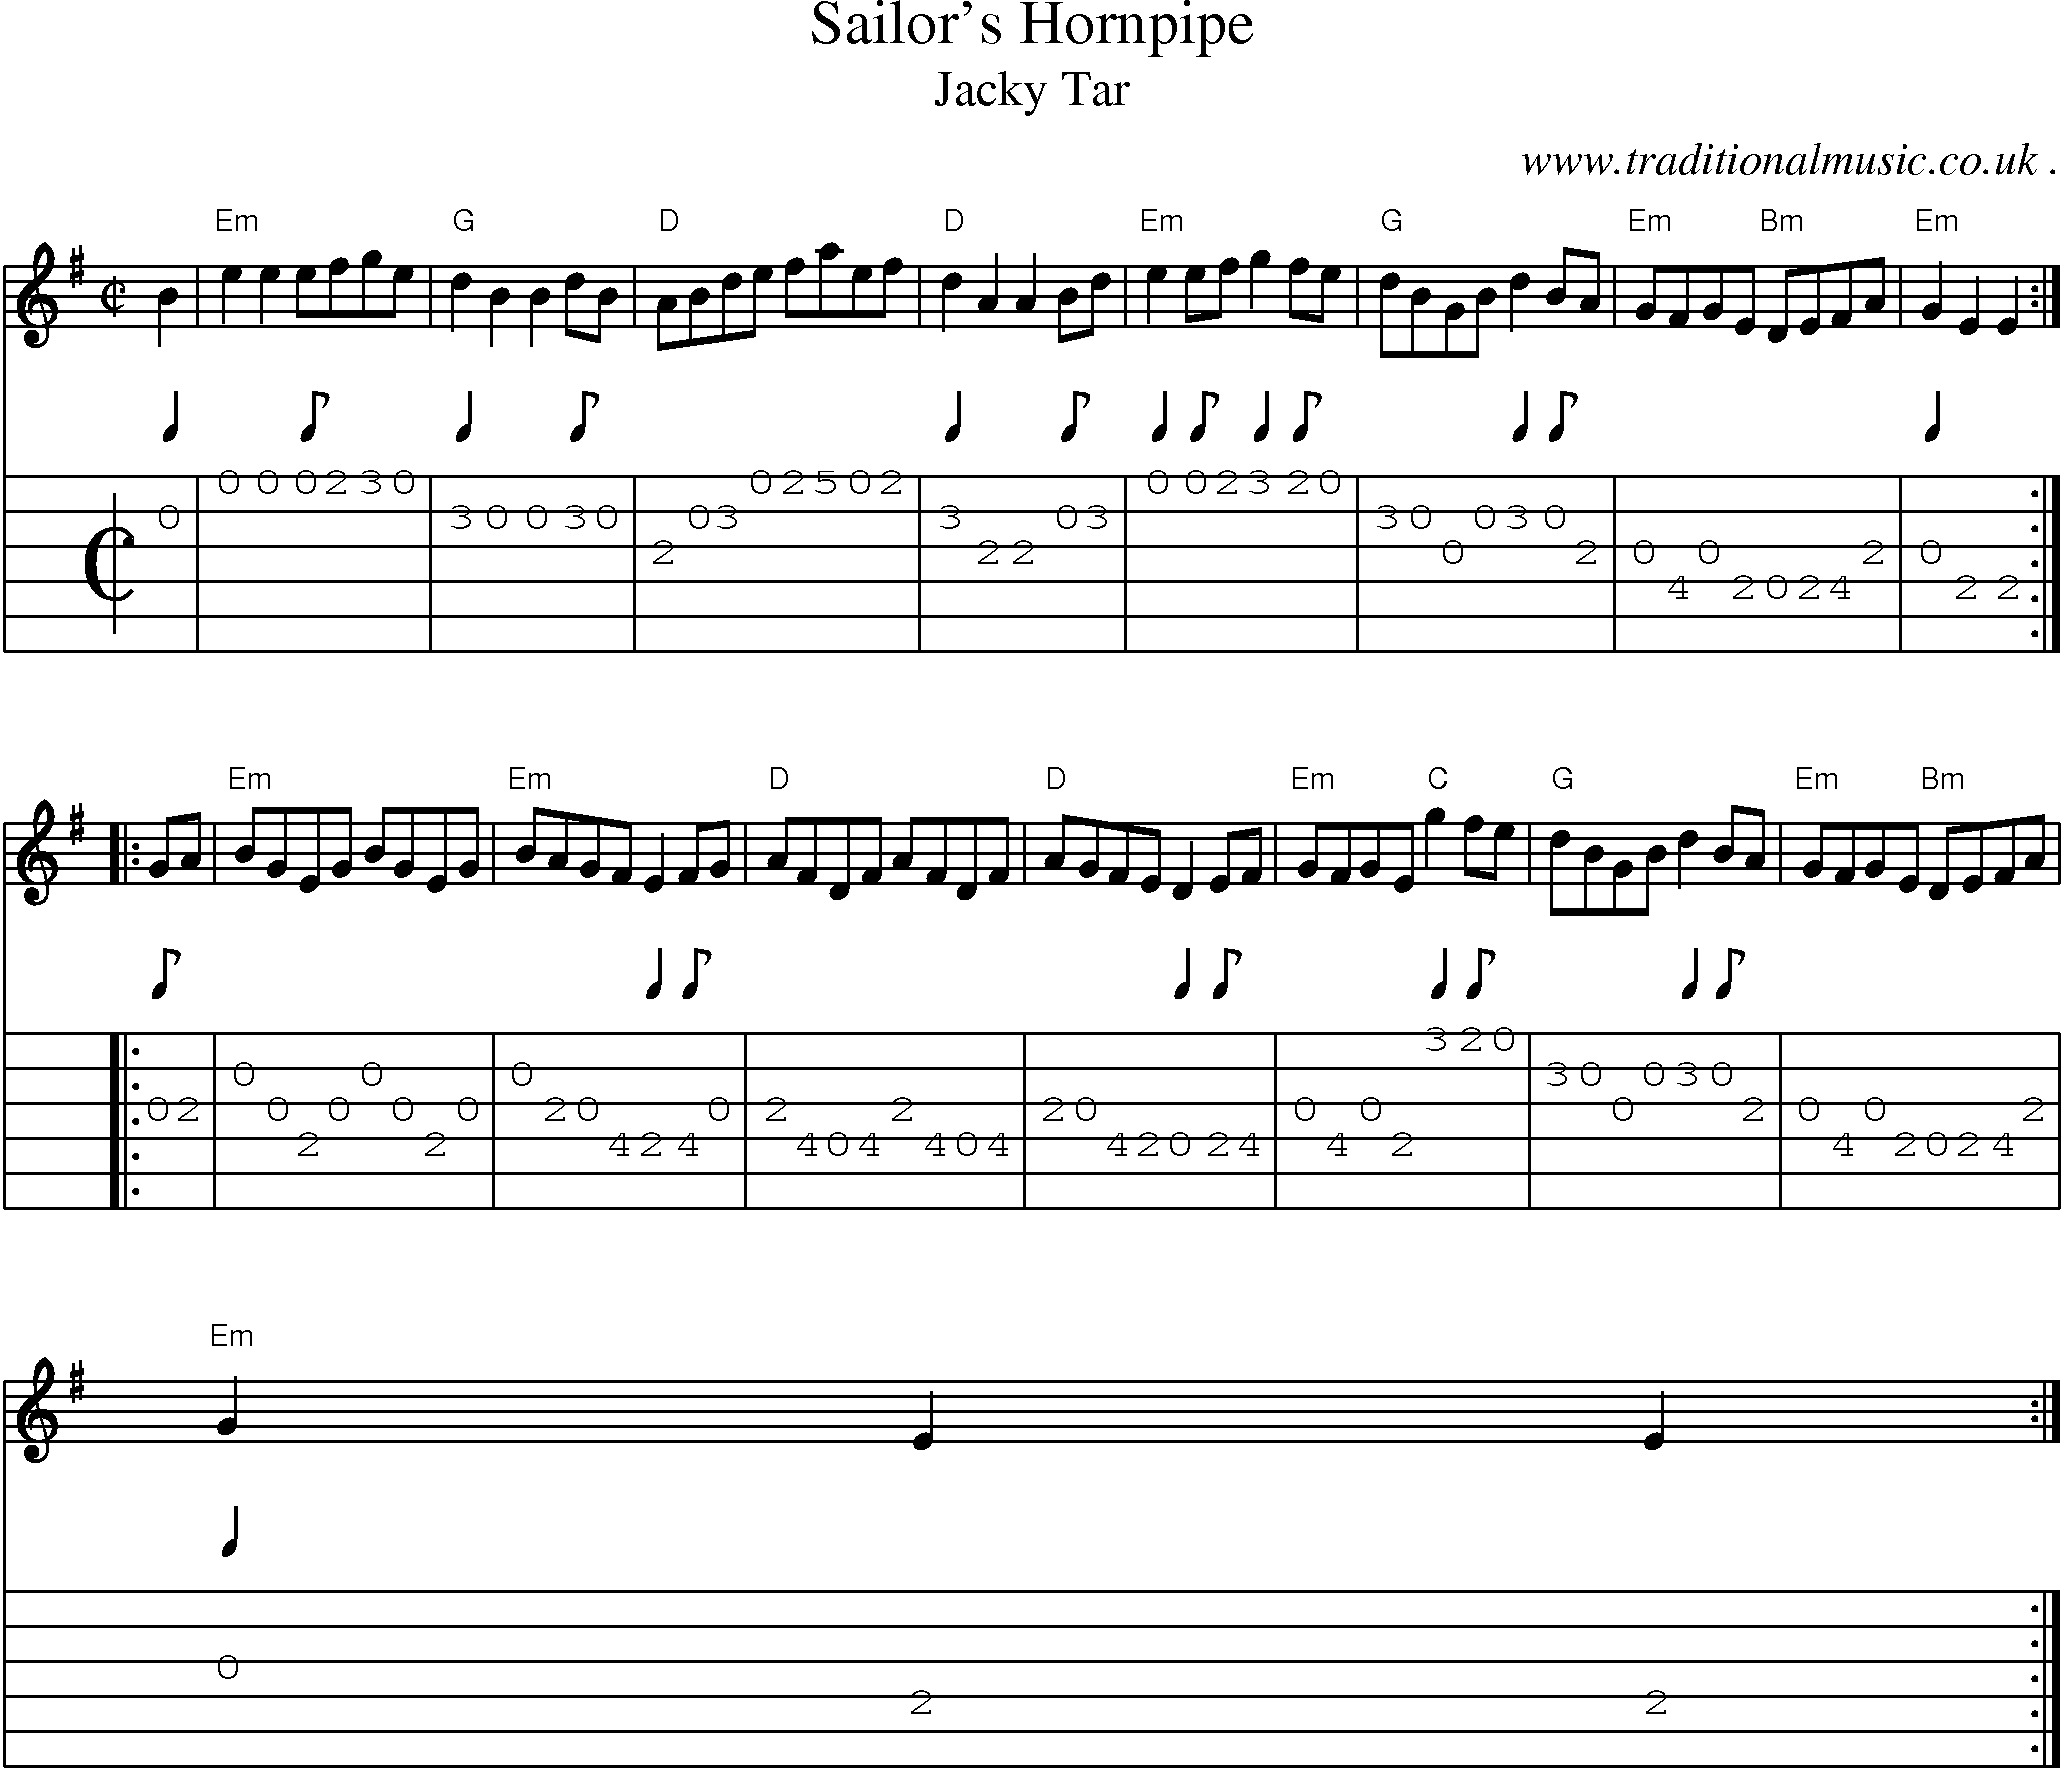 Sheet-music  score, Chords and Guitar Tabs for Sailors Hornpipe